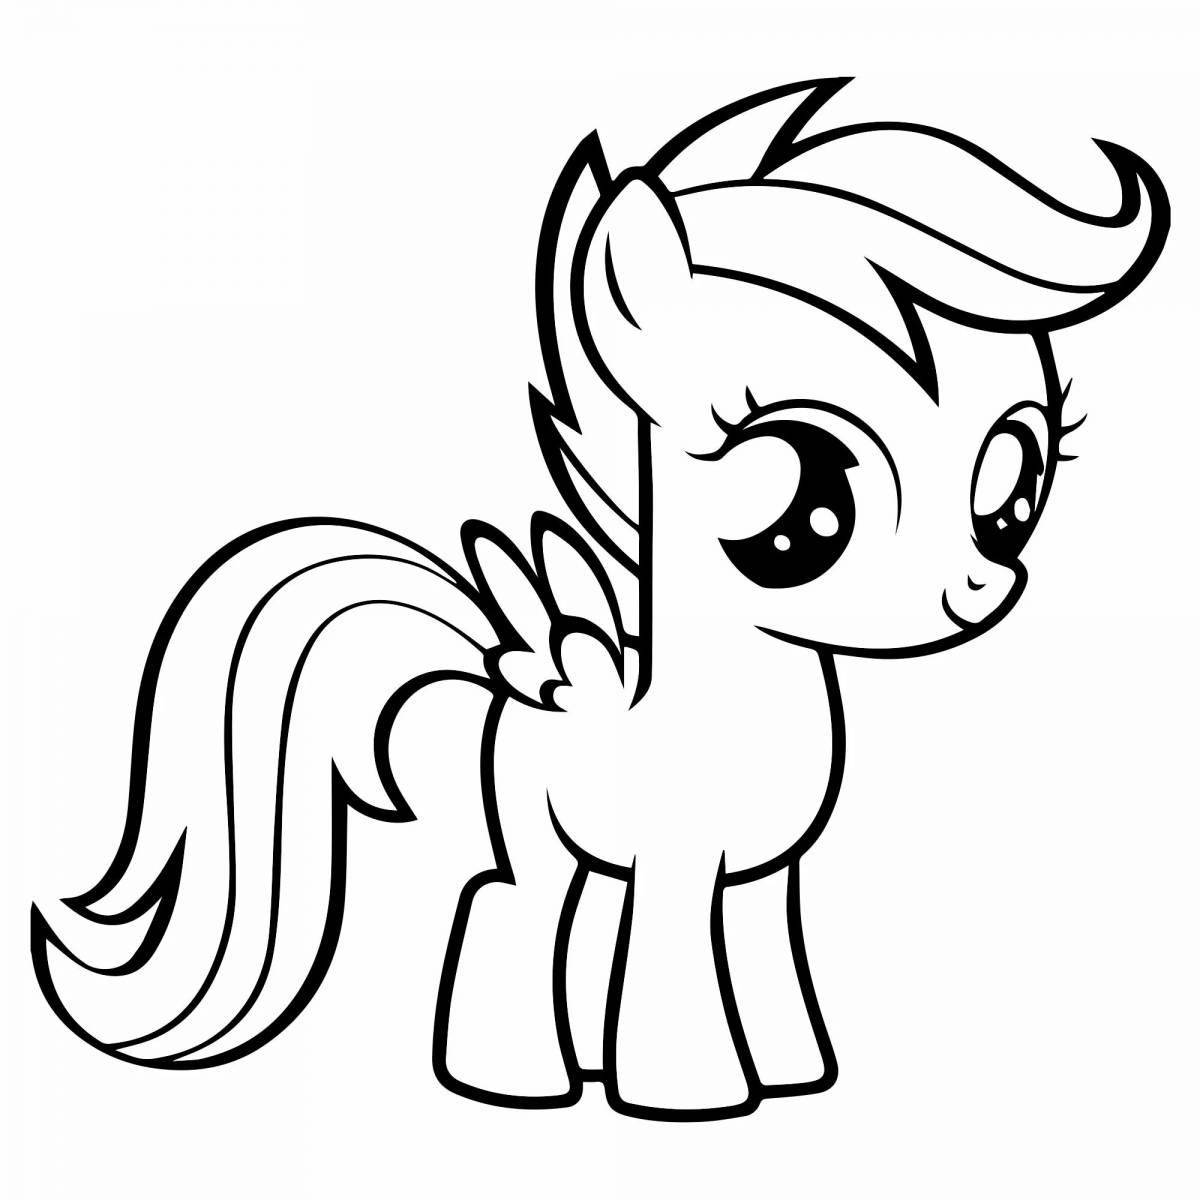 Coloring page elegant baby pony